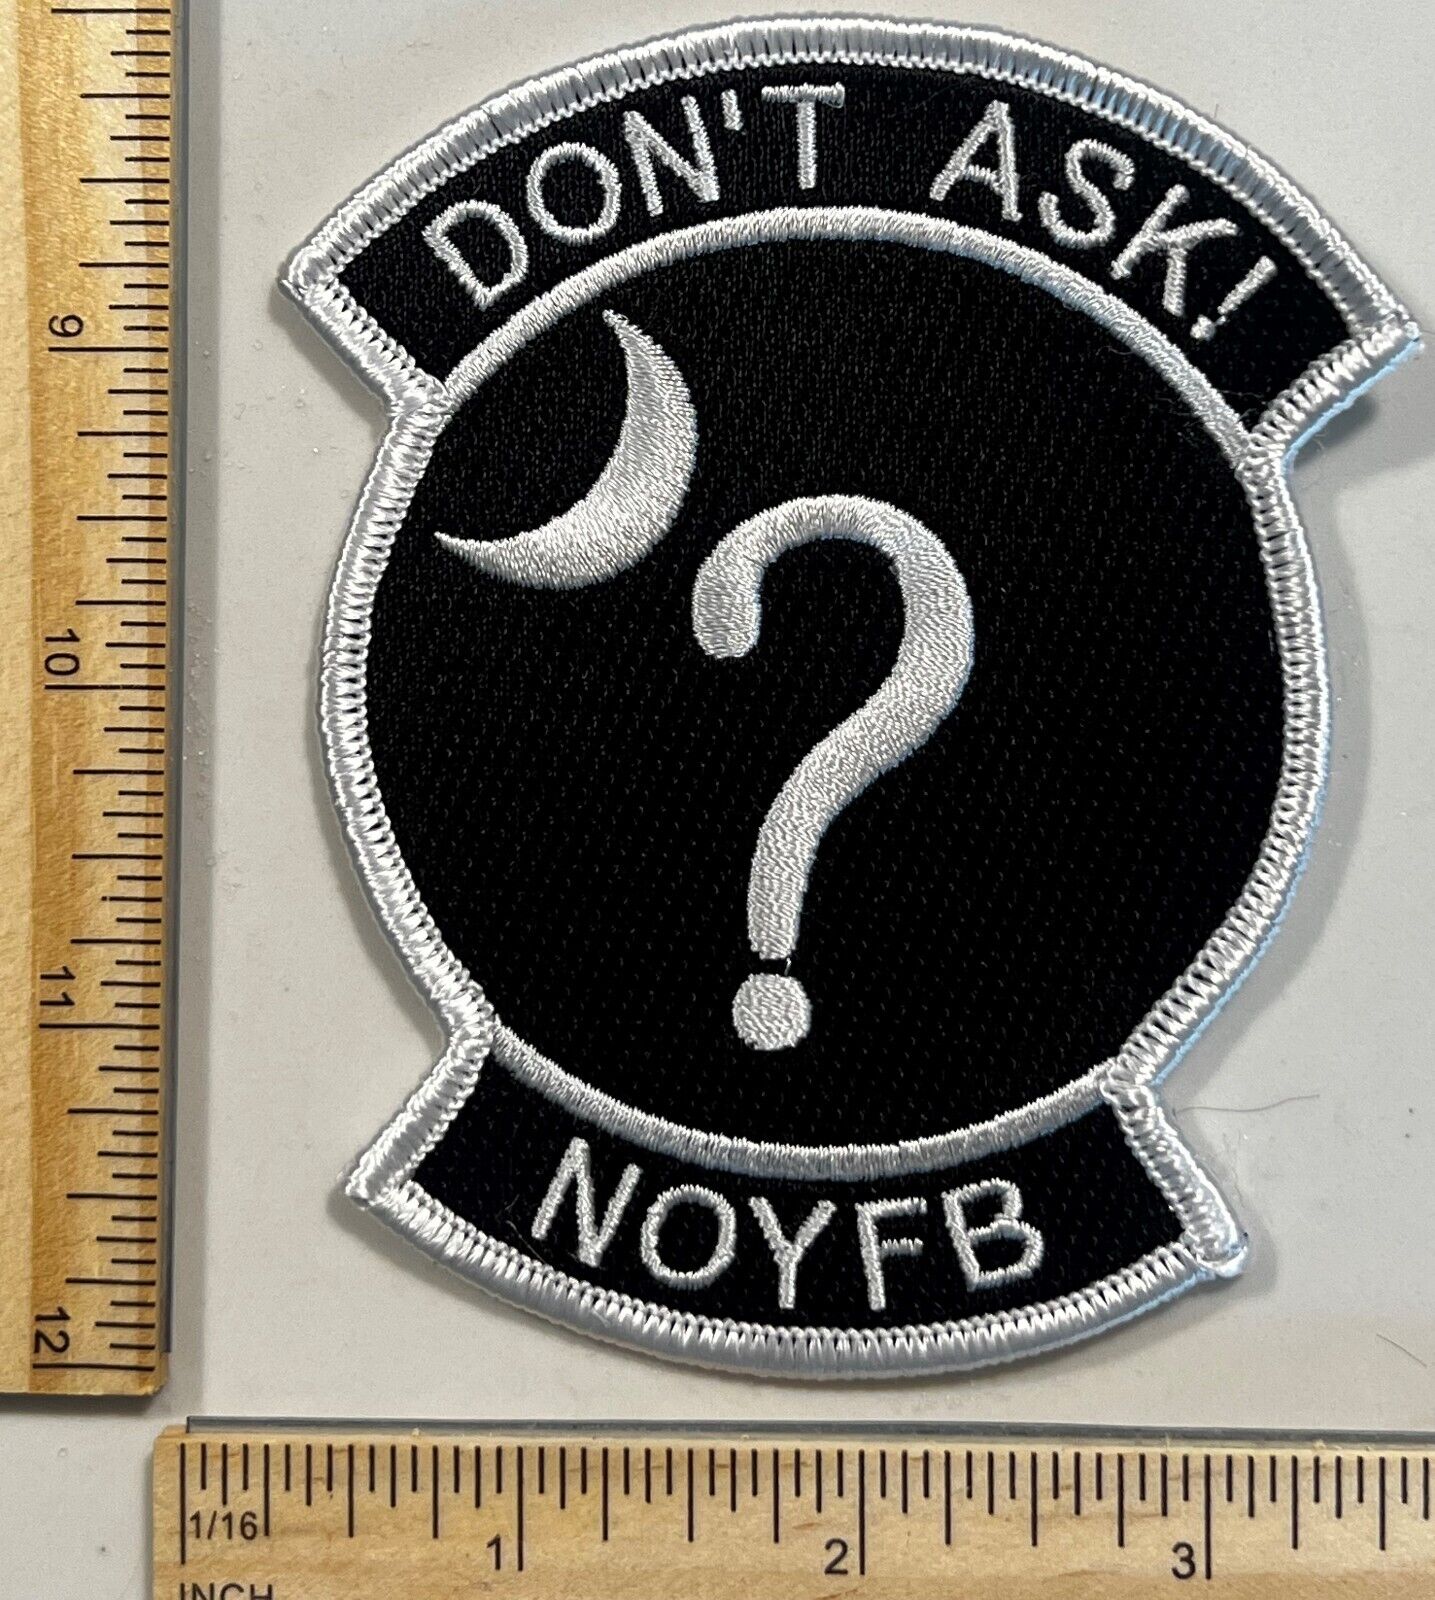 RARE - BLACK OPS MILITARY PATCH – DONT ASK NOYFB - 22ND MILITARY AIRLIFT SQUAD